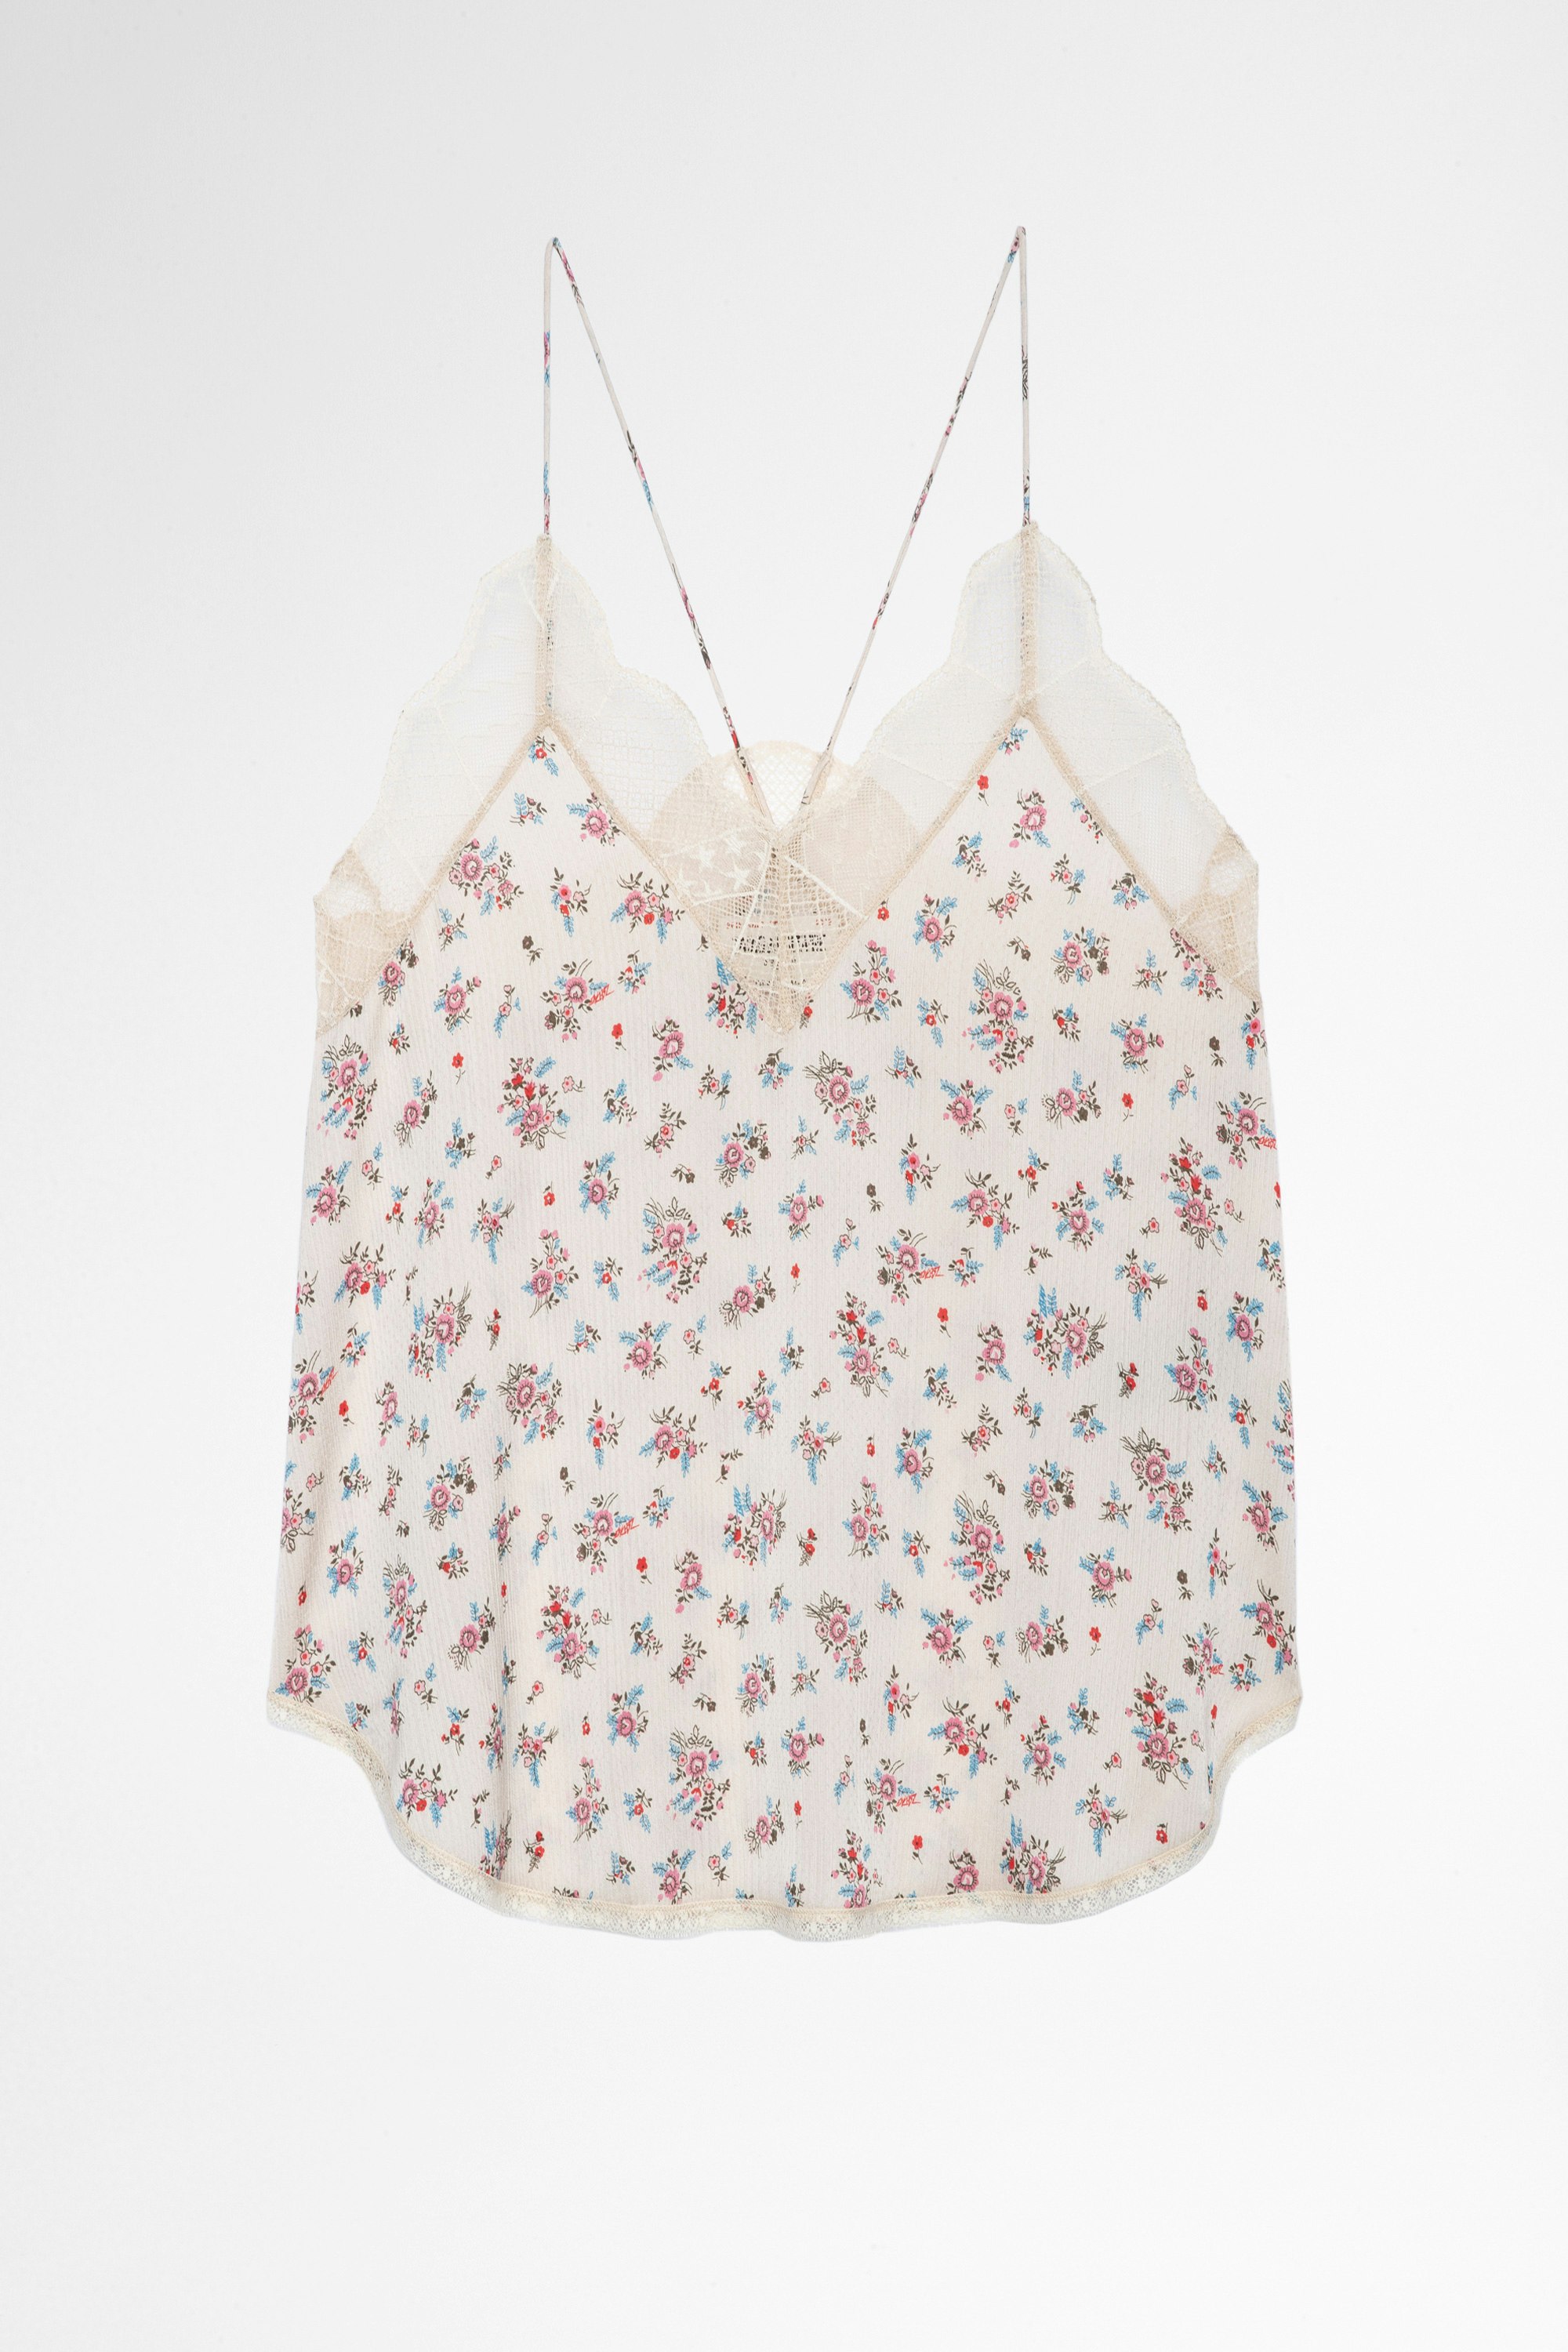 Christy キャミソール Women's floral print camisole in white with lace trim